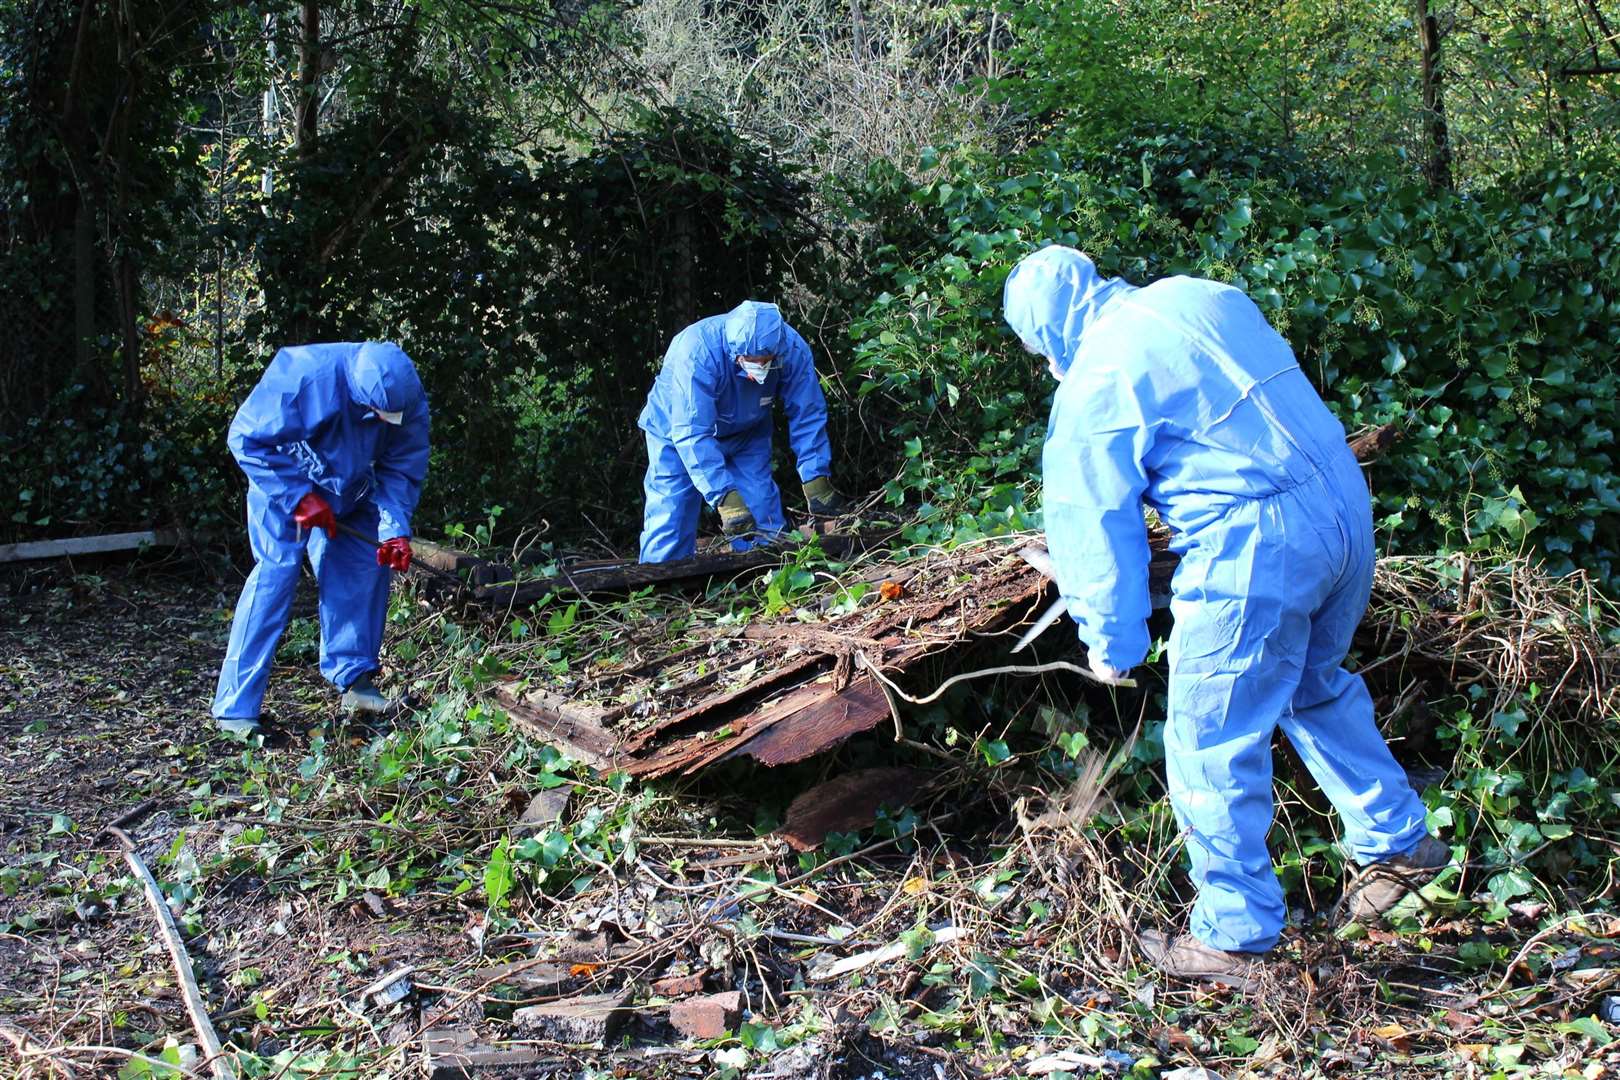 Heavily protected volunteers from the Valley Conservation Society removing asbestos from Crisbrook Meadow in Tovil in 2014